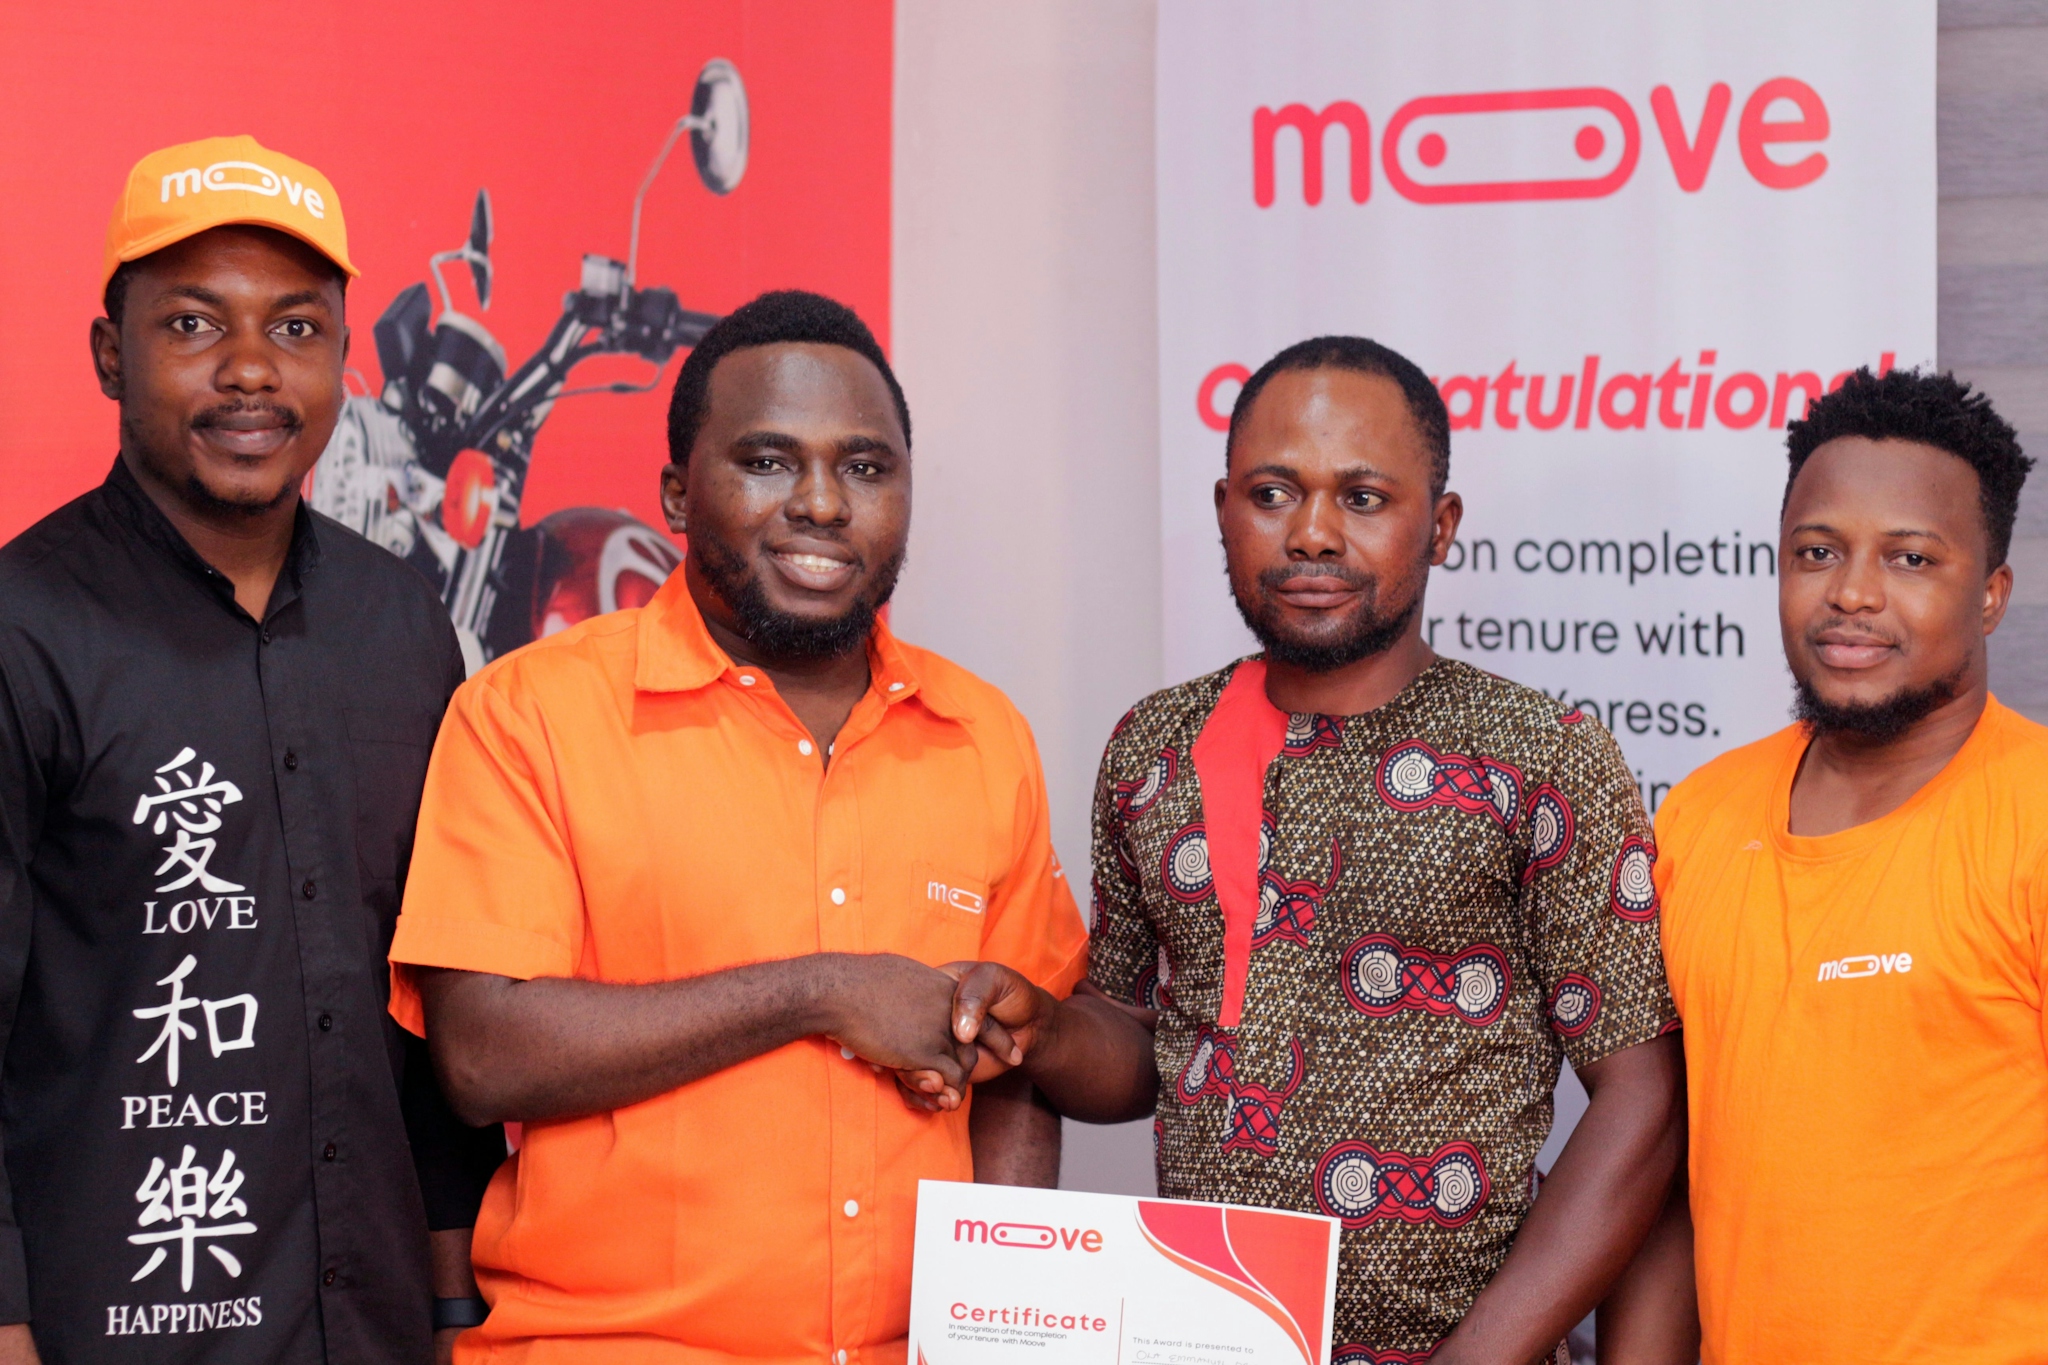 Moove Customers in Ibadan, Nigeria celebrating full ownership of their vehicles. L to R: Timi Ayoade, Senior Manager for Customer Acquisition & Onboarding at Moove, Gbolahan Ajijola, Mooves Country Manager for Nigeria, Ola Emmanuel Orisumibare, Moove cust